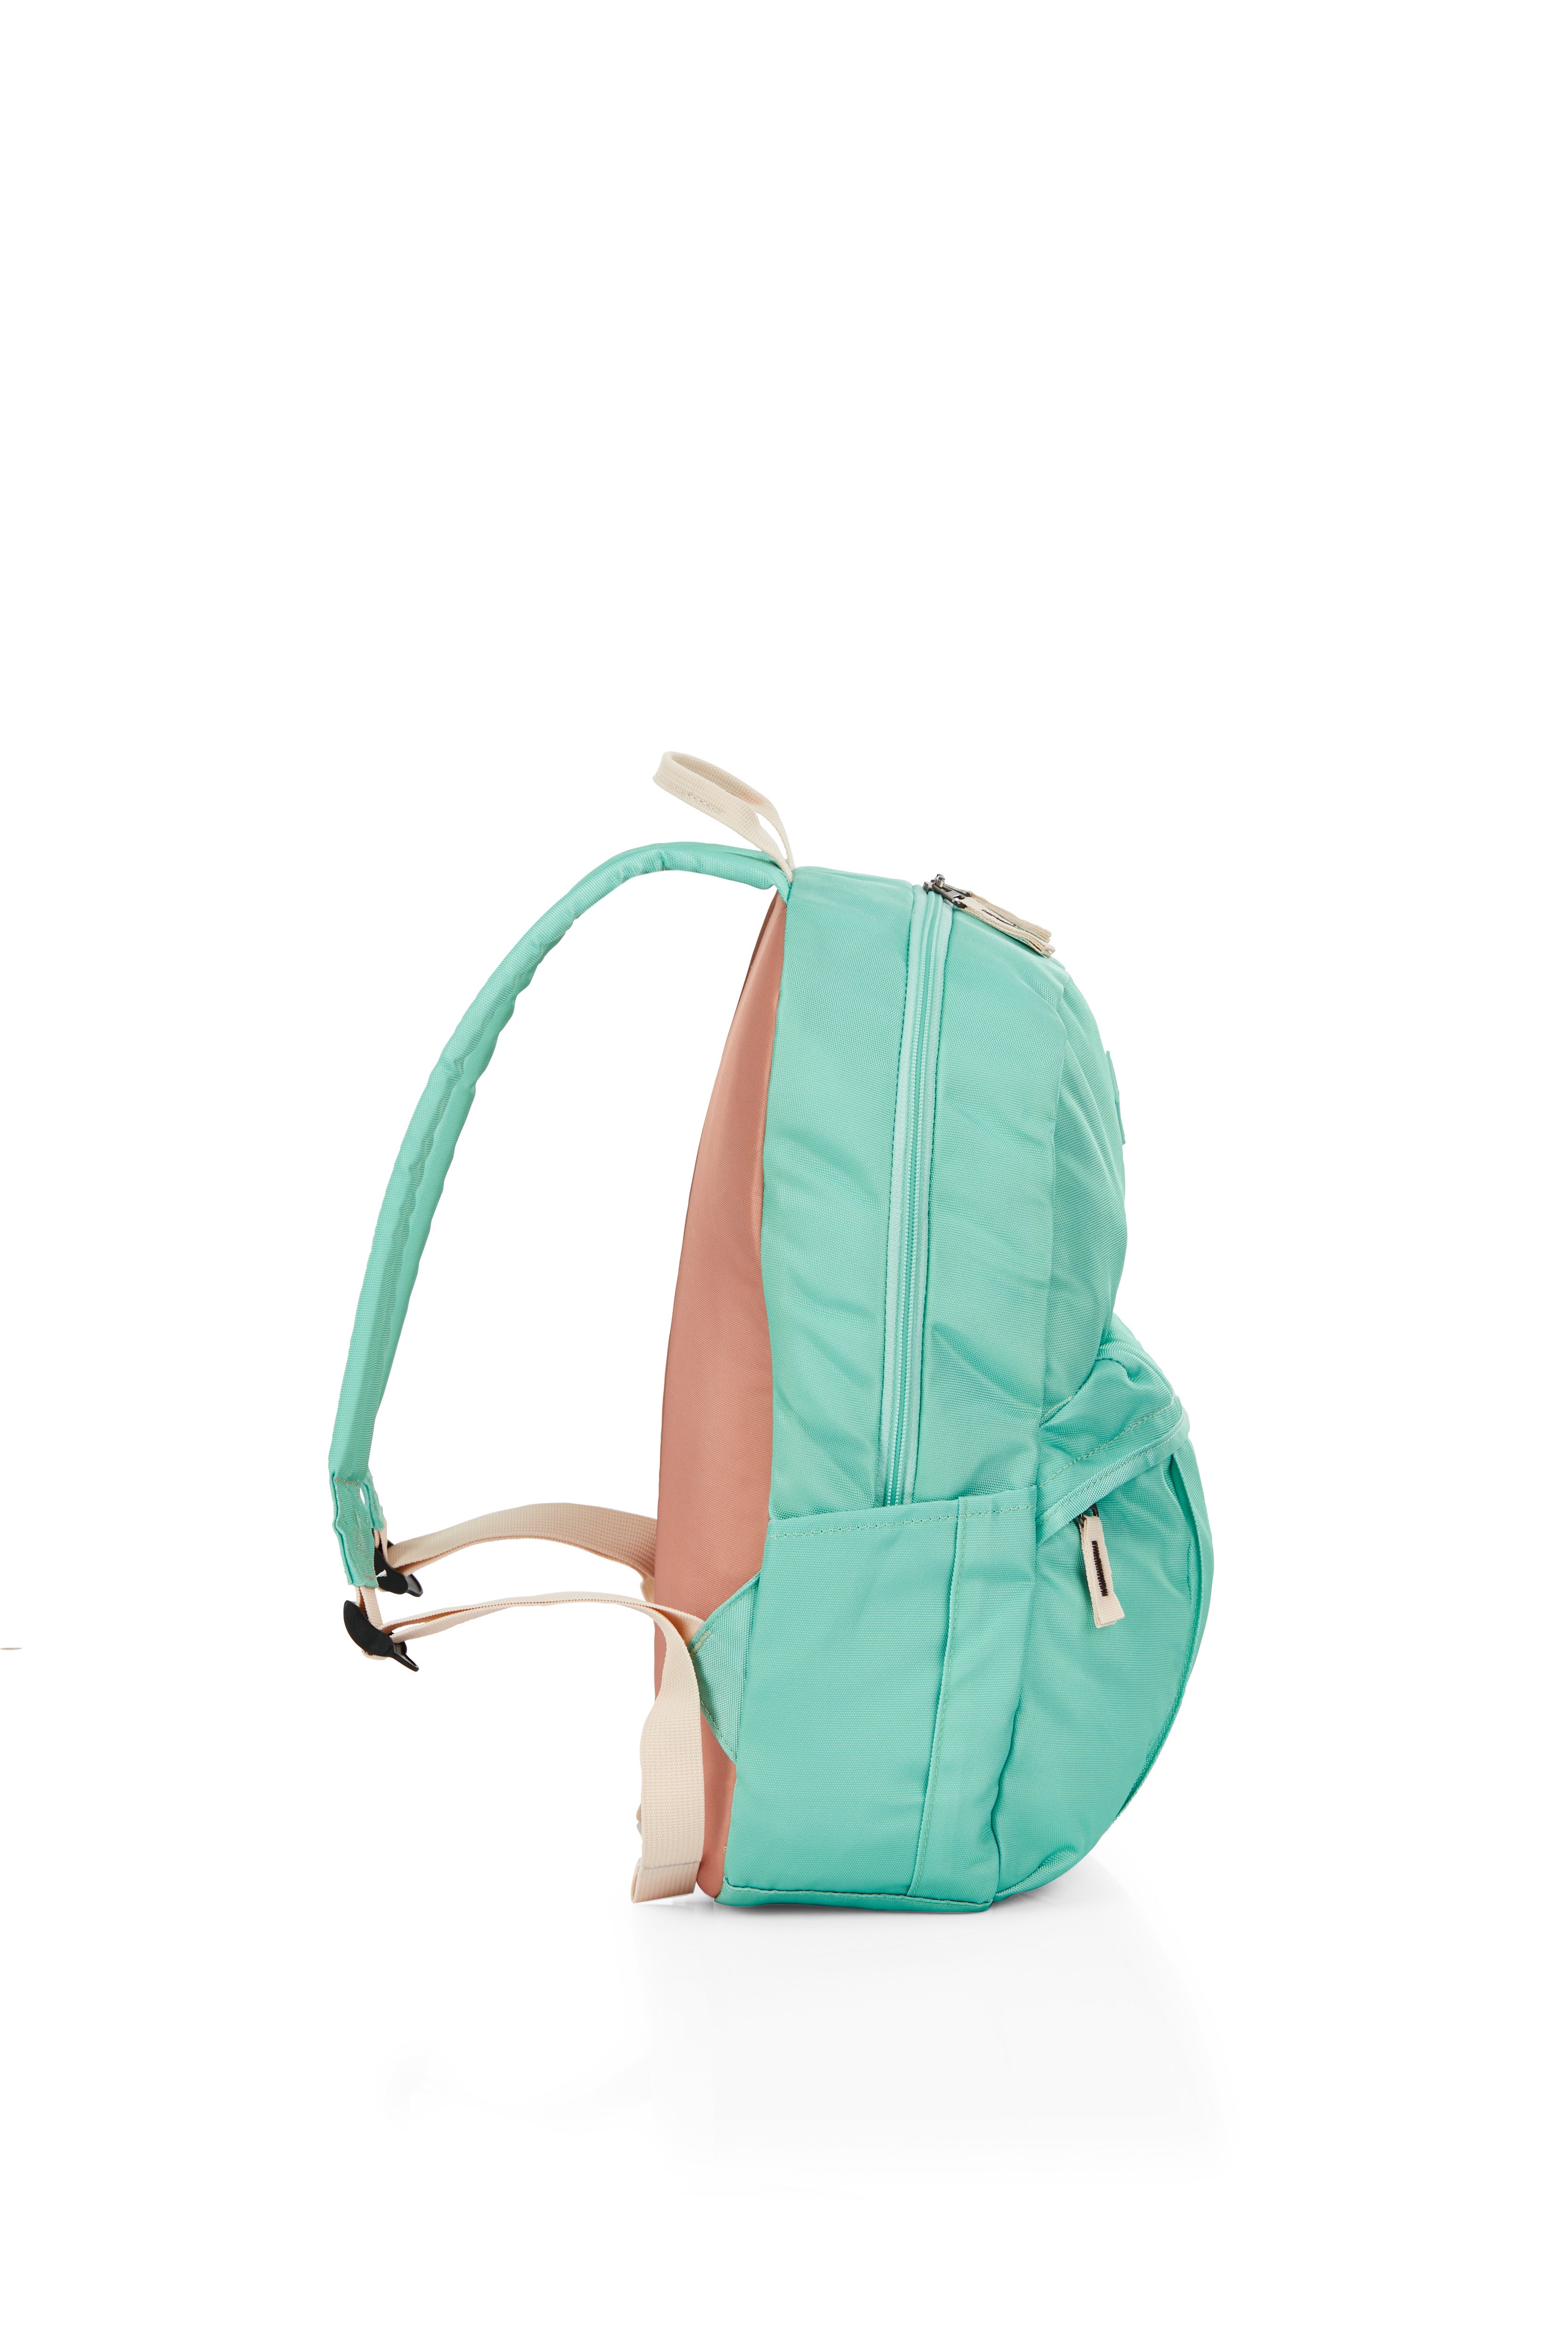 American Tourister - RUDY Small Fashion Backpack - Ice Mint-5